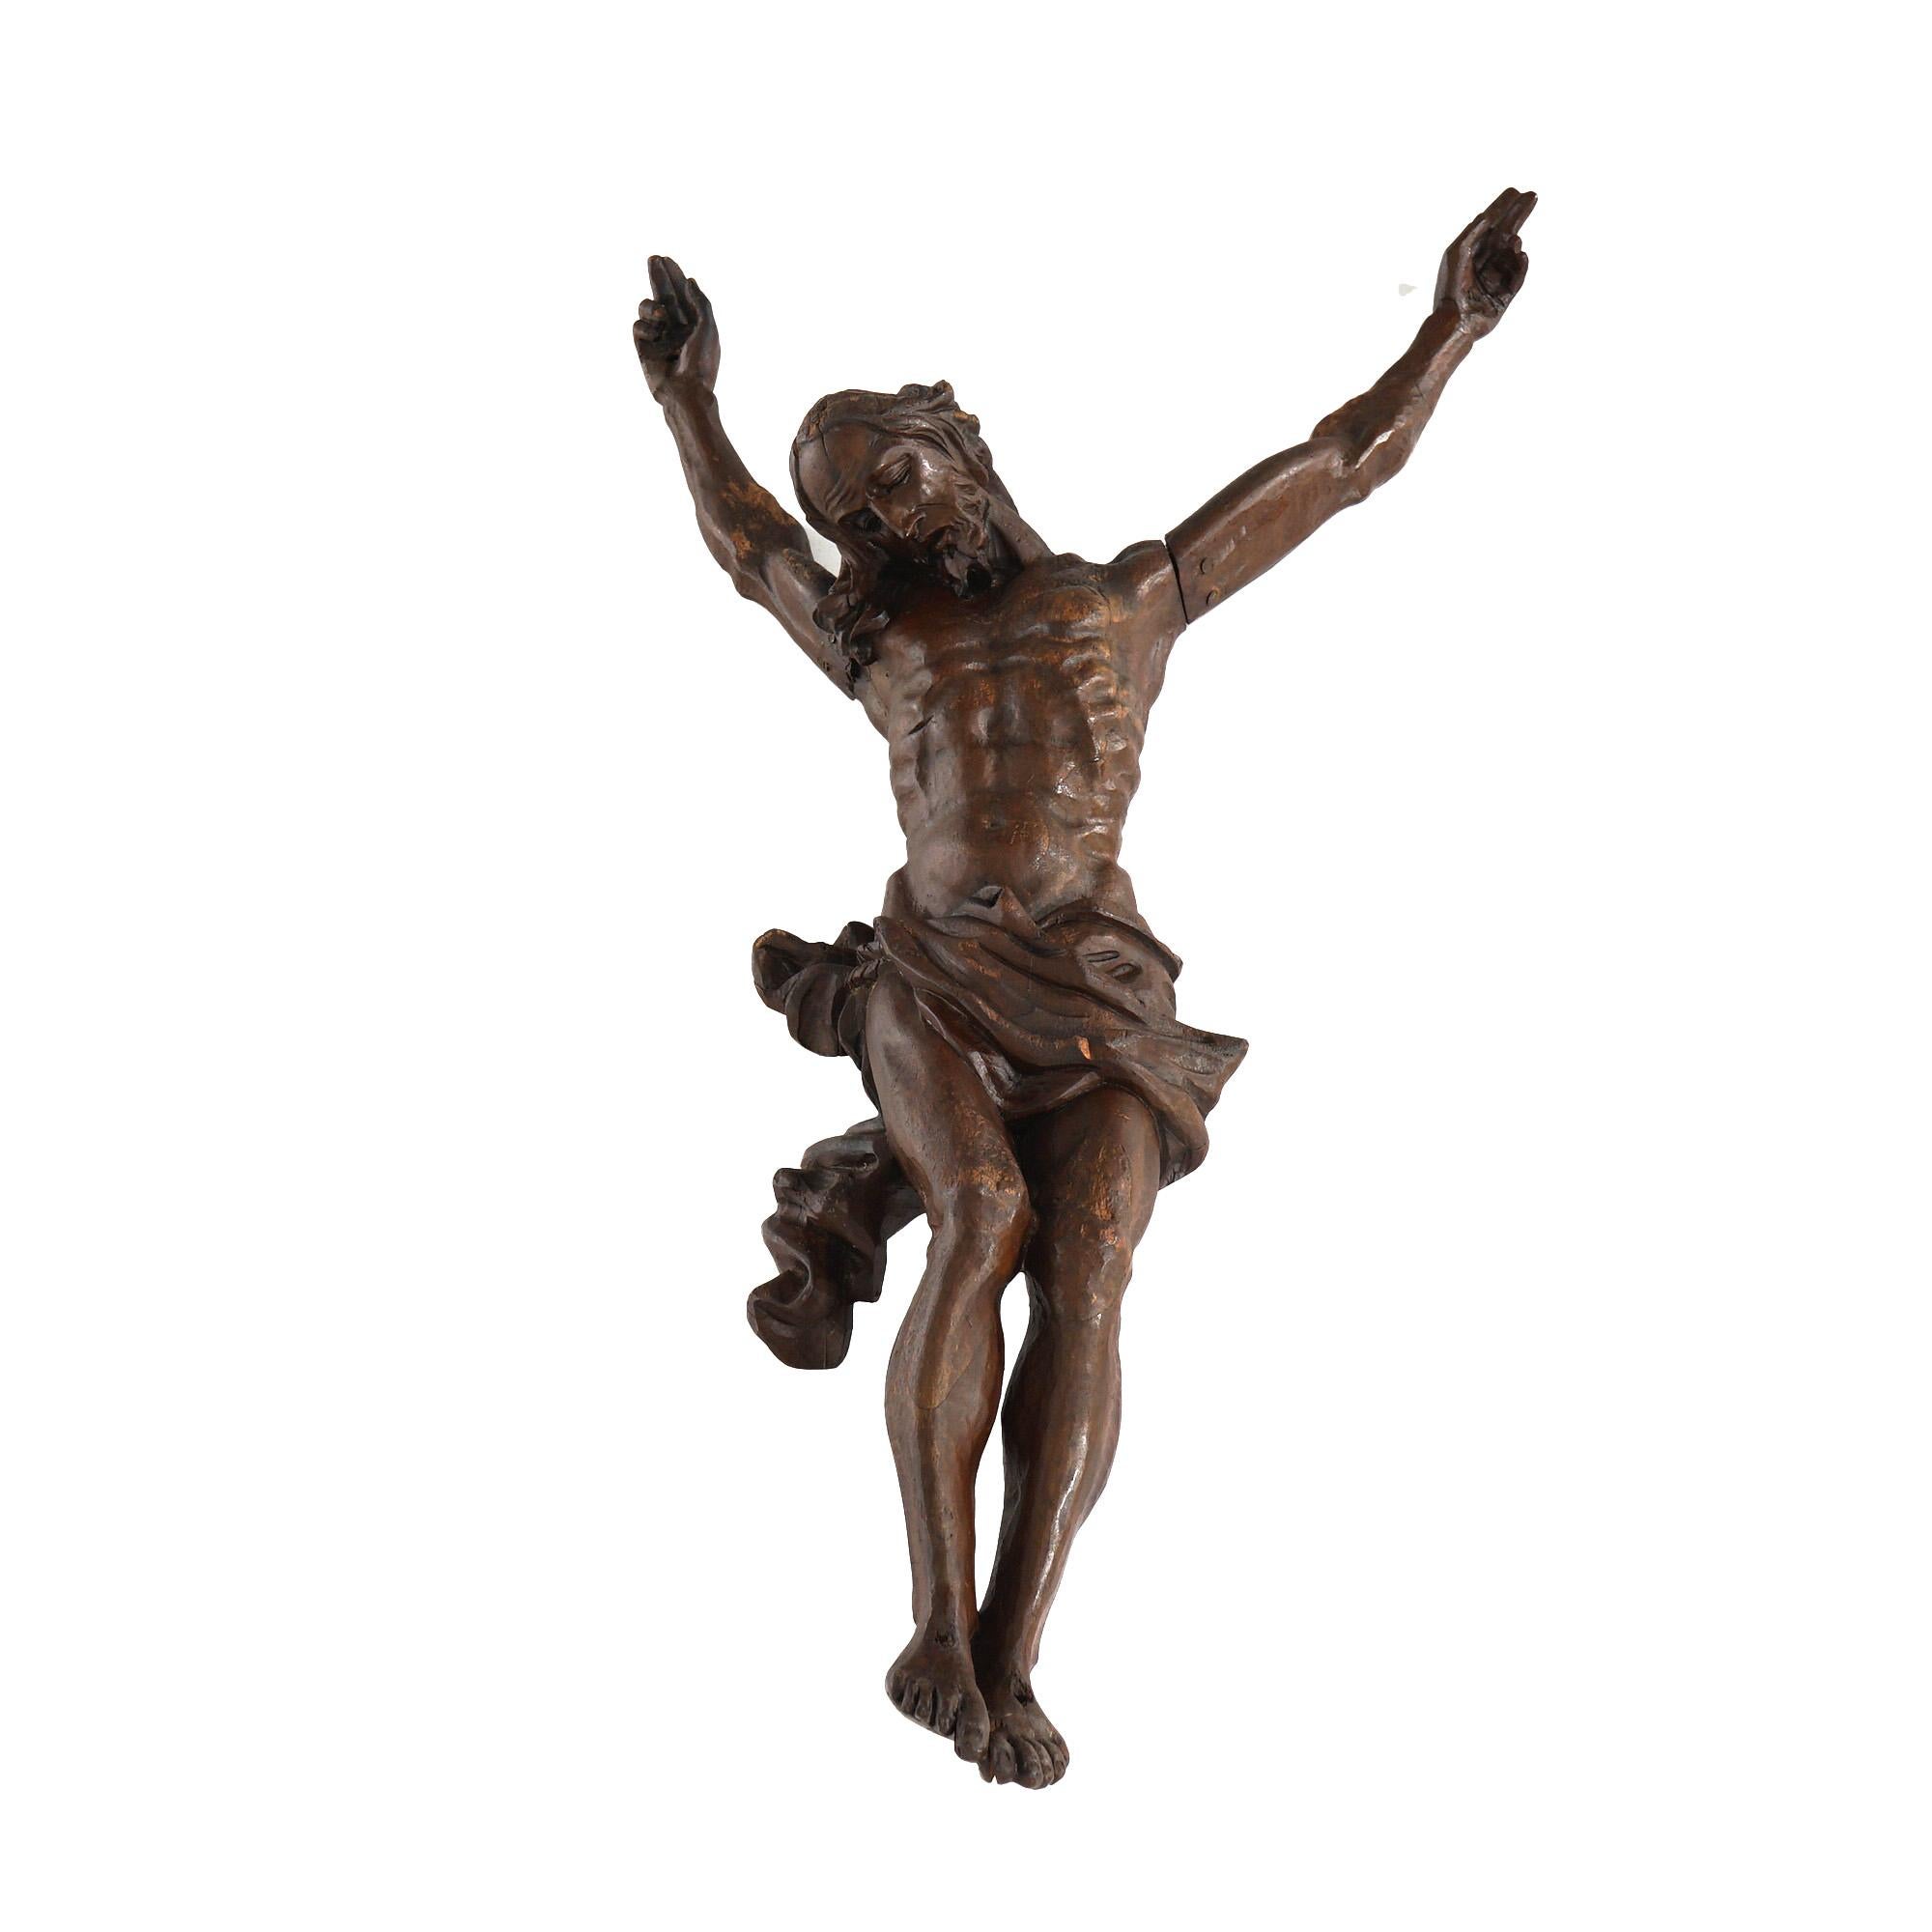 An antique Italian wall sculpture offers hand carved and stained oak statue of the crucified Jesus Christ, 19th century

Measures - 36